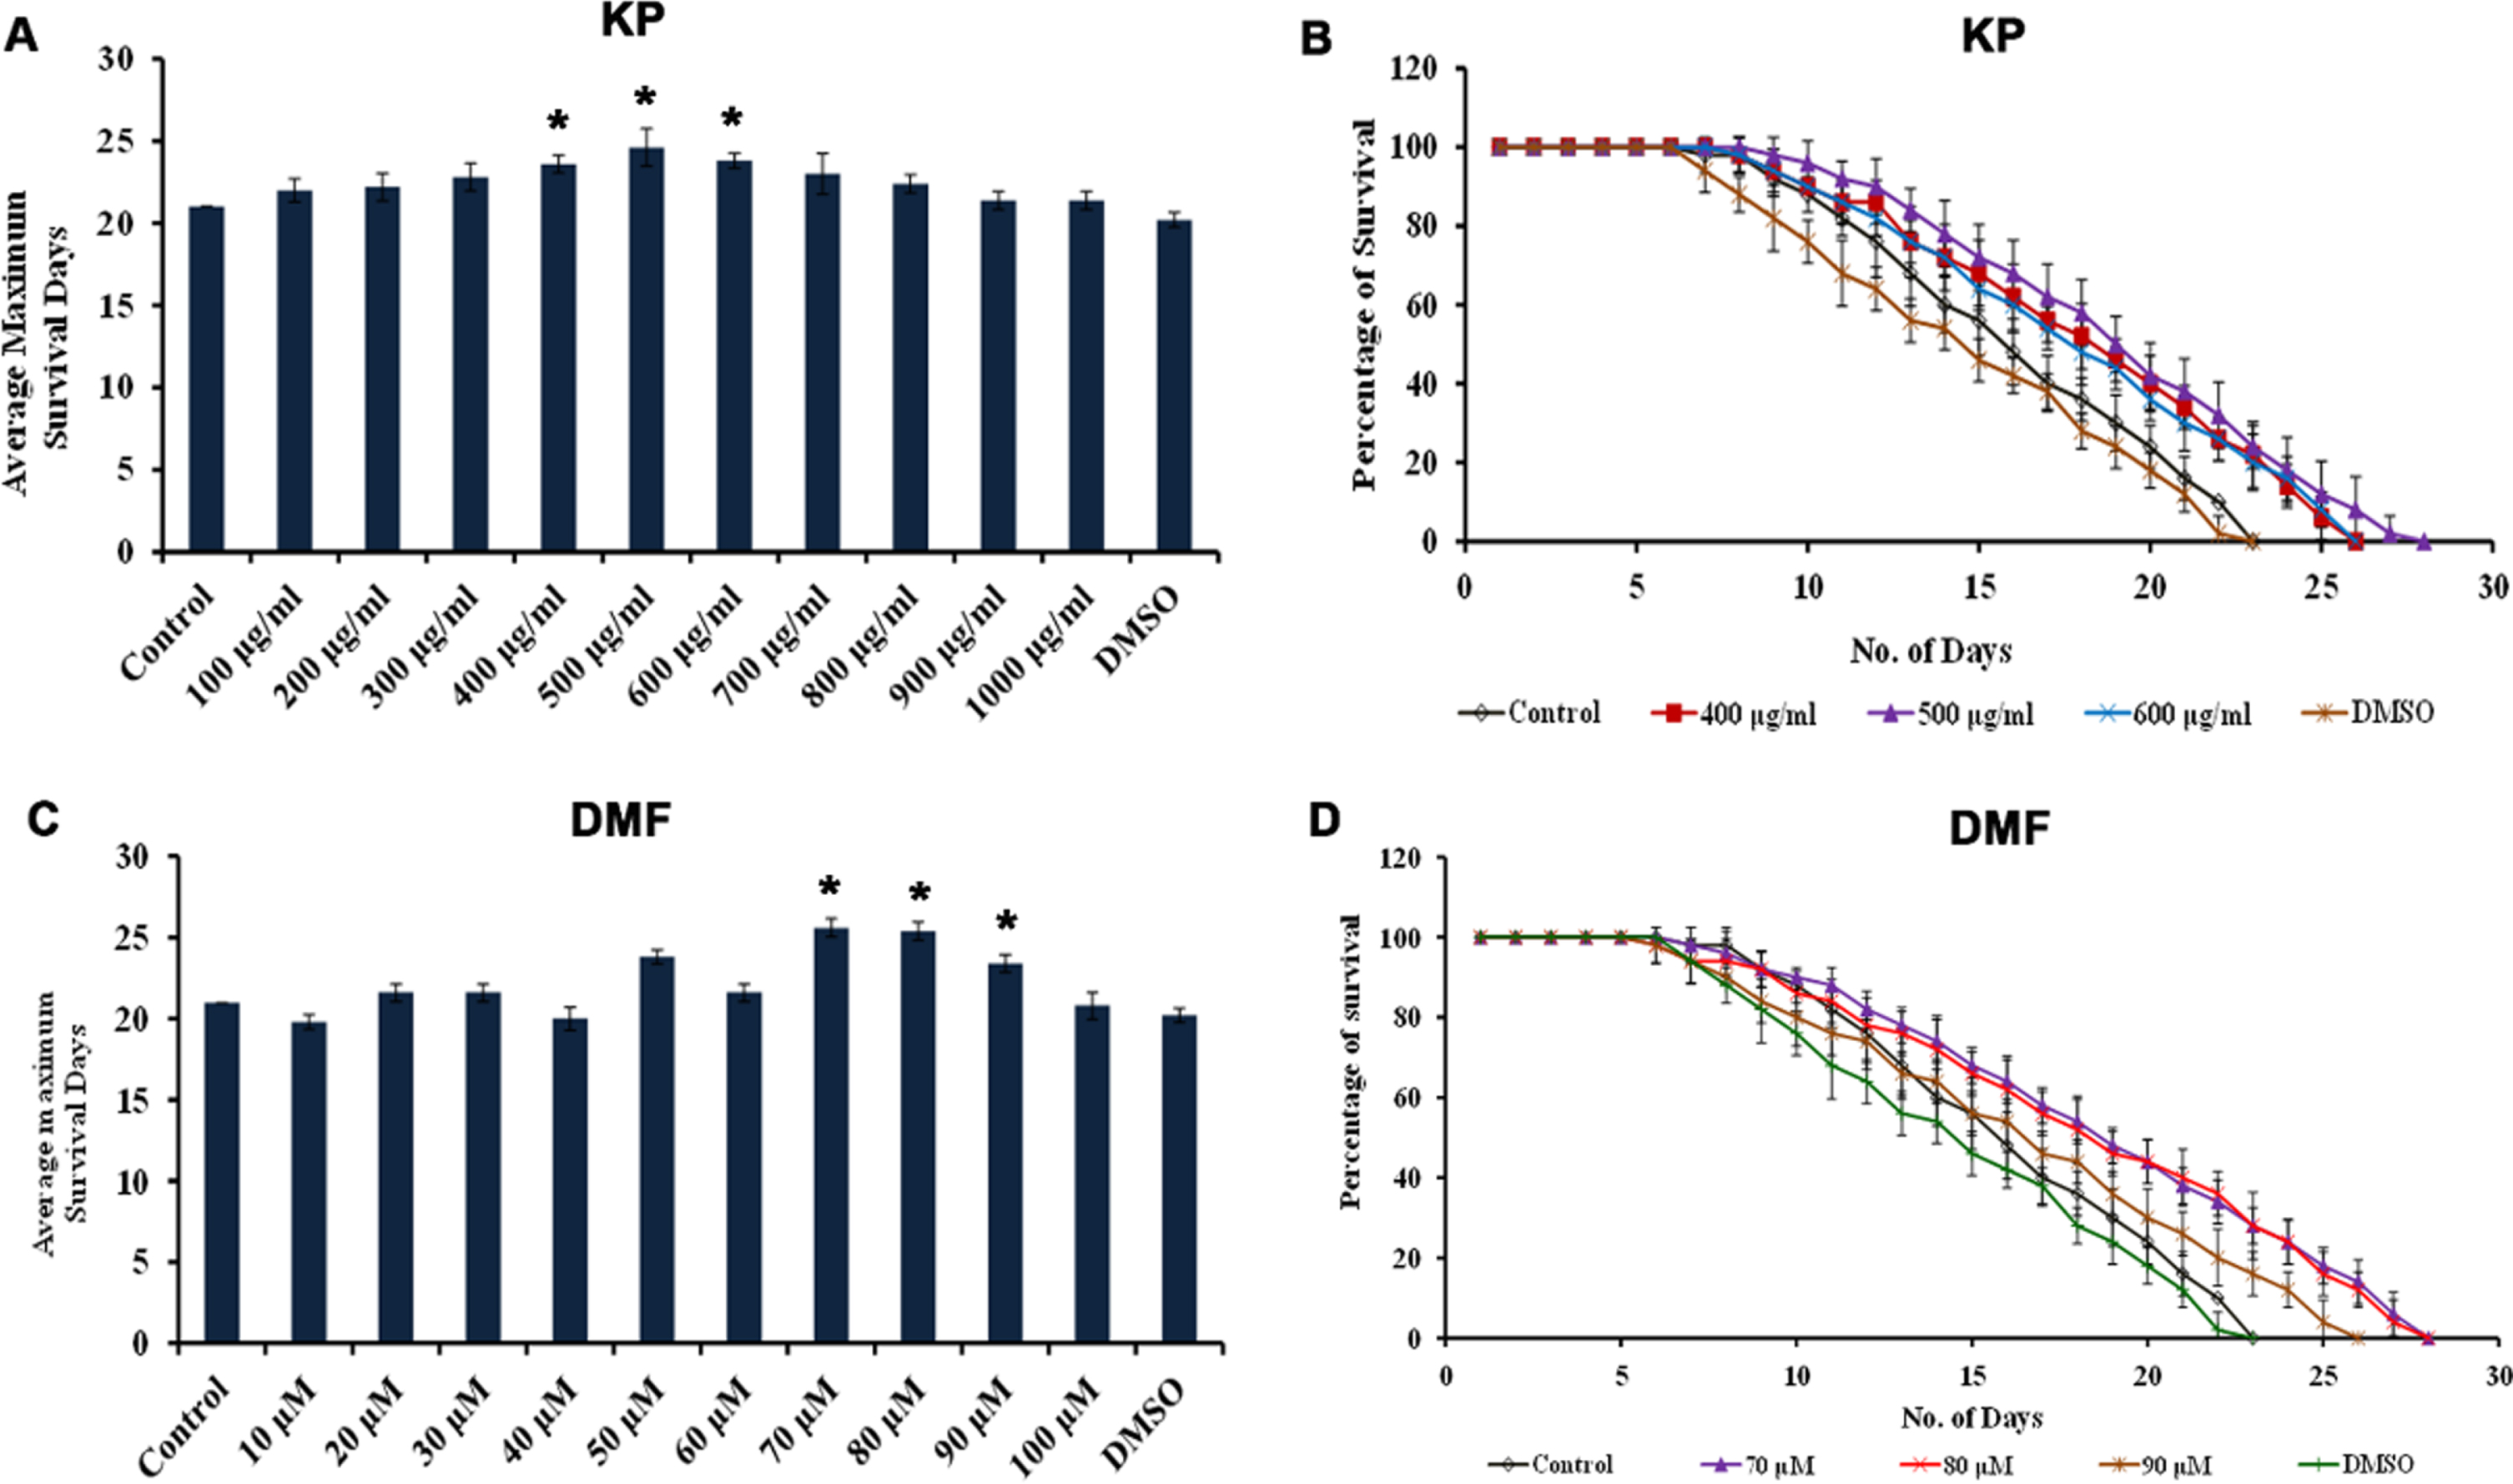 KP and DMF could extend the maximum lifespan in C. elegans. (A) Average maximum survival rate of KP extract (100 –1000μg/ml) in N2 worms, wherein 400 –600μg/ml exhibited significant (p <  0.05) extension of lifespan when compared to control (B) KP extract (400 –600μg/ml) significantly (p <  0.05) prolonged the lifespan of nematodes to 25, 27 and 25 days respectively (C) Average maximum survival rate of DMF (10 –100μM) in N2 worms, wherein 70 –90μM exhibited significant (p <  0.05) extension of lifespan when compared to control (D) DMF (70 –90μM) significantly (p <  0.05) prolonged the lifespan of nematodes to 27, 27 and 25 days respectively.